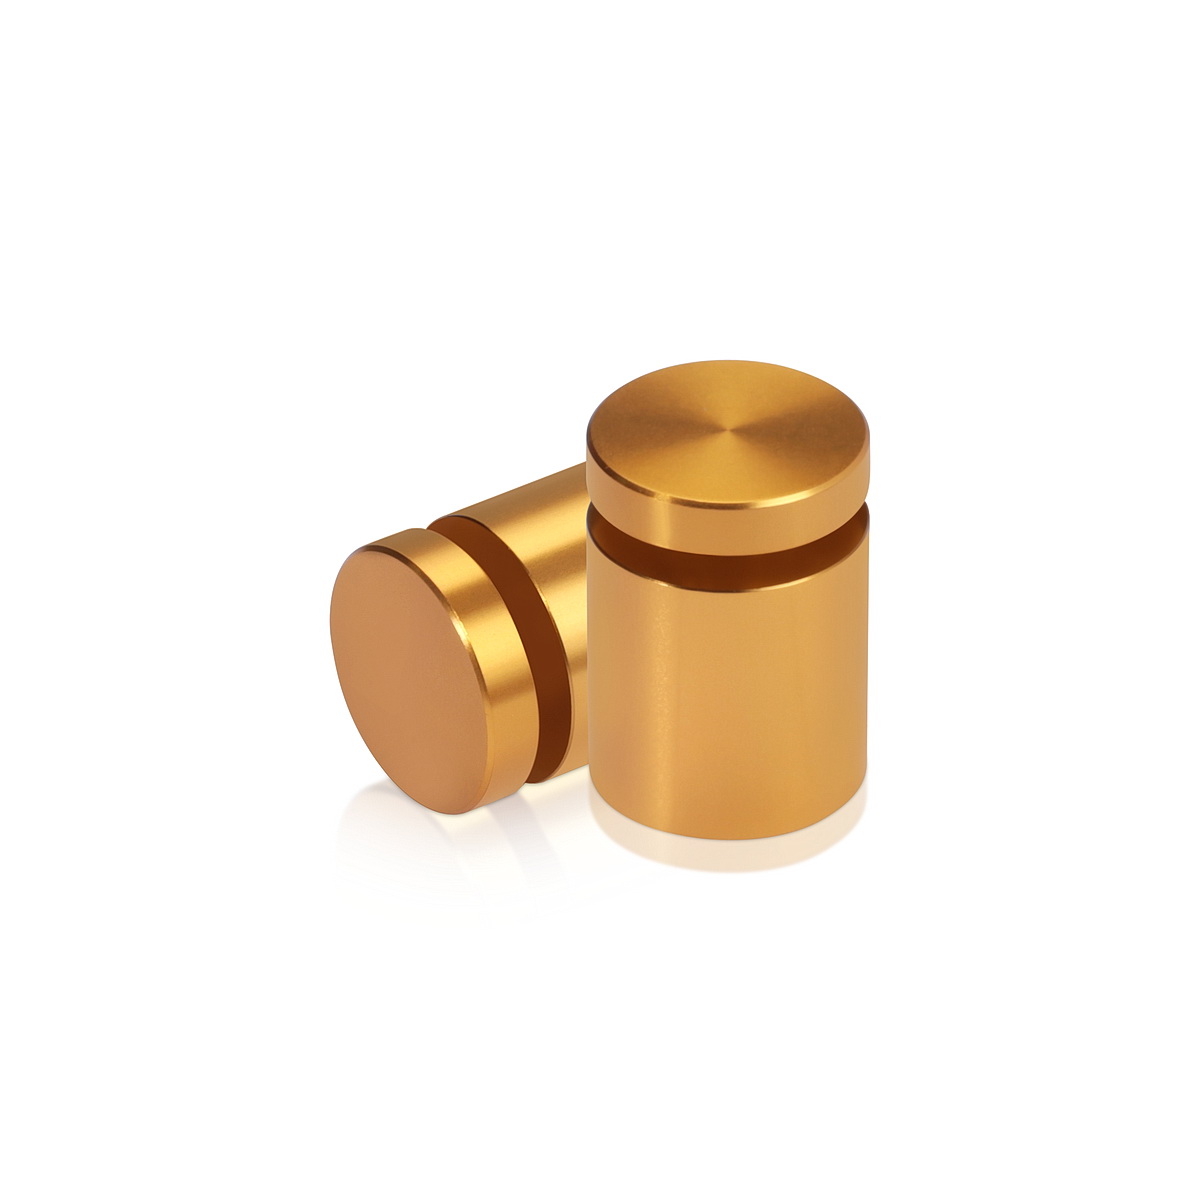 3/4'' Diameter X 3/4'' Barrel Length, Affordable Aluminum Standoffs, Gold Anodized Finish Easy Fasten Standoff (For Inside / Outside use) [Required Material Hole Size: 7/16'']